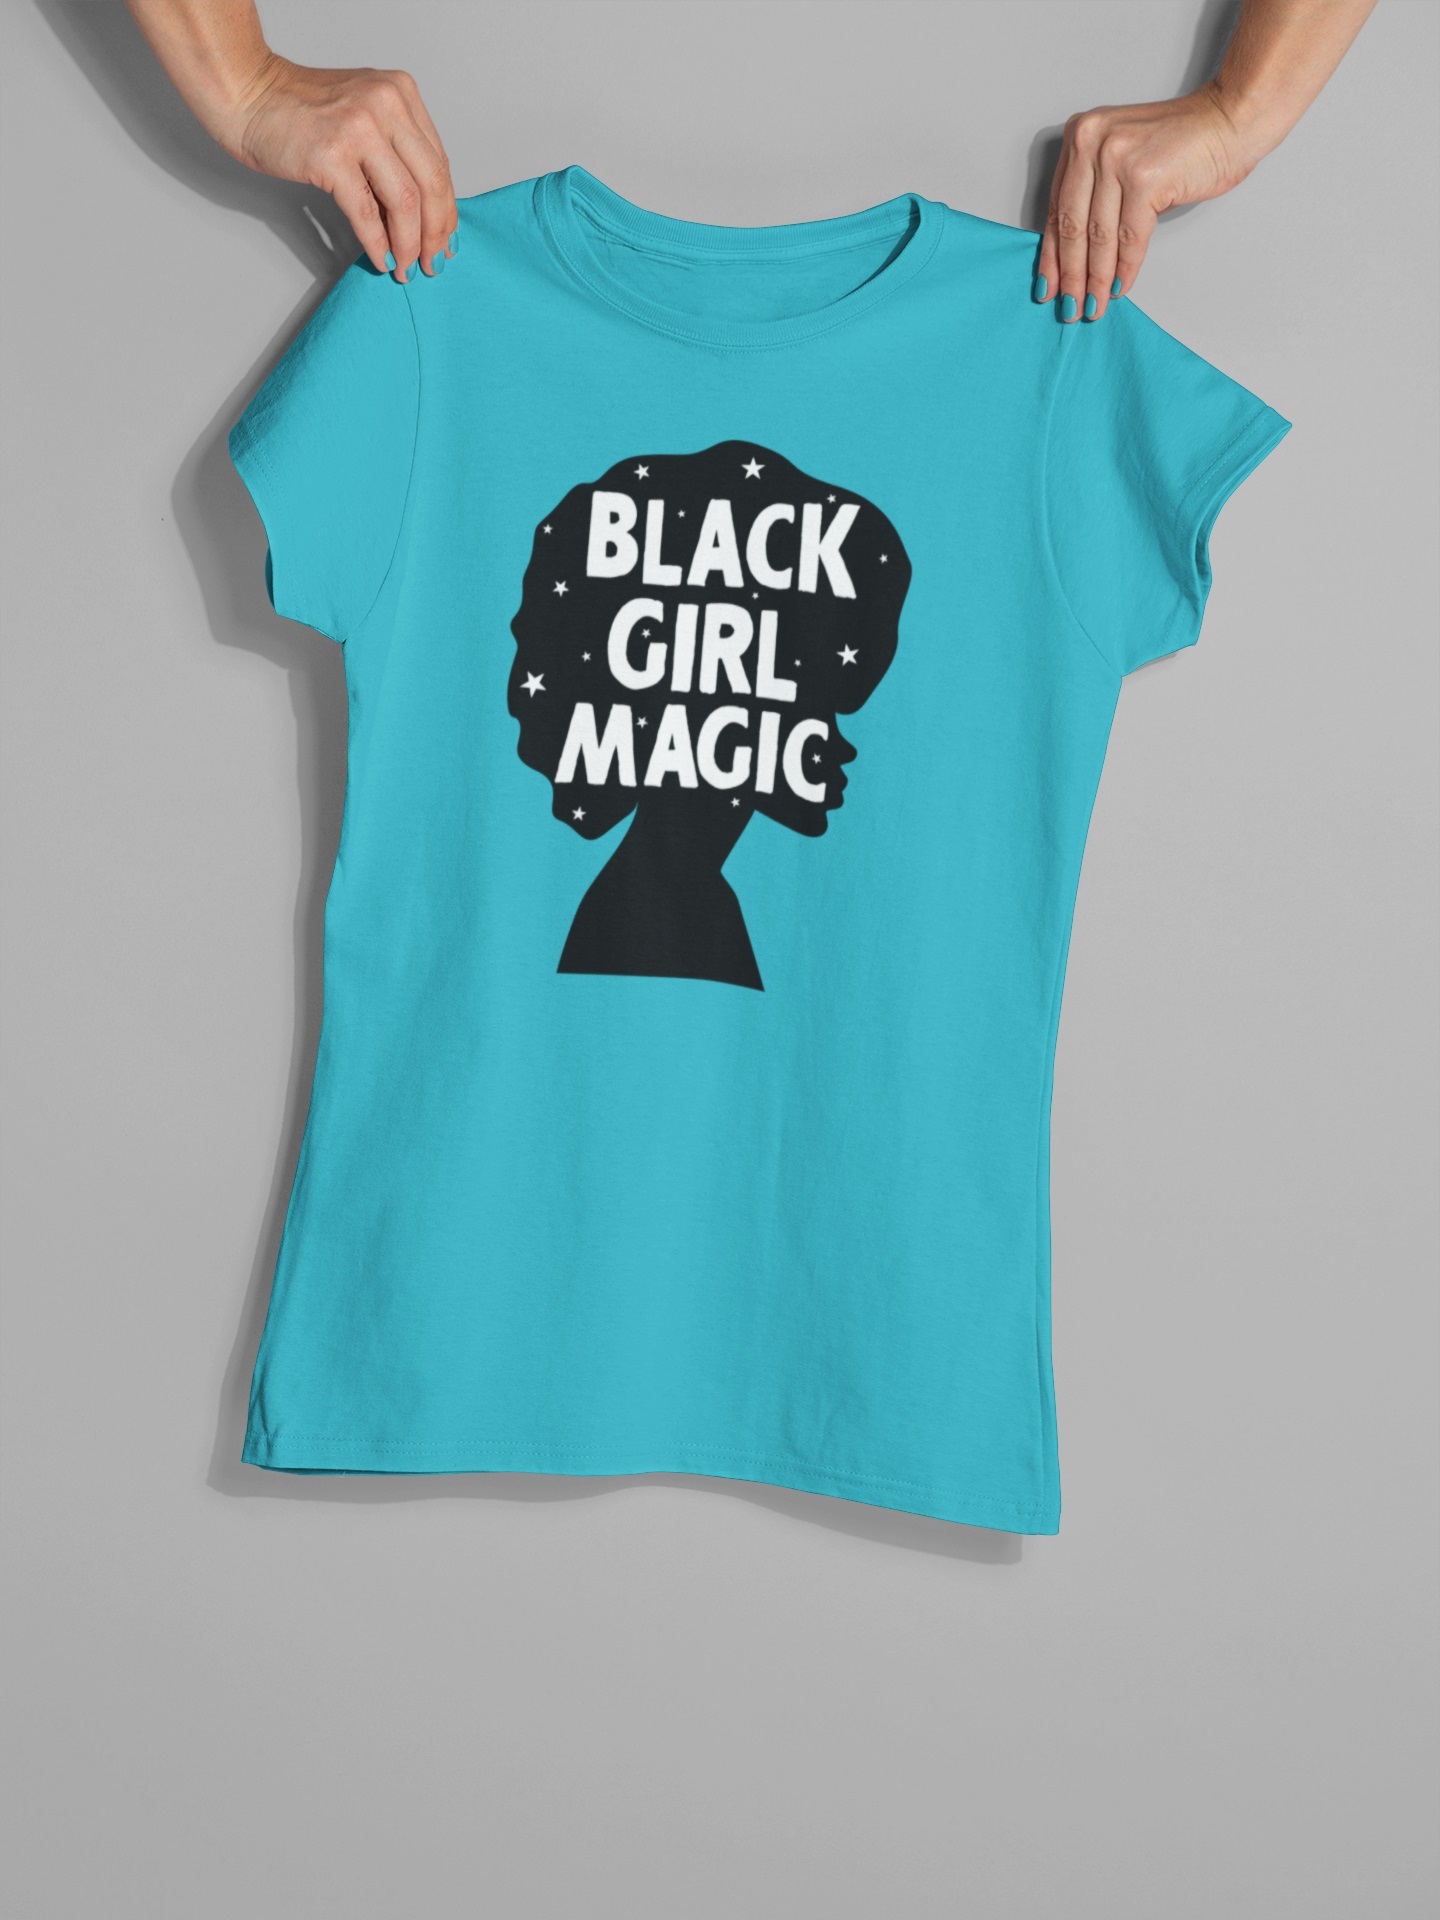 Old Glory Juniors Black History Month Black Girl Magic Afro Short Sleeve Graphic T Shirt - image 5 of 6